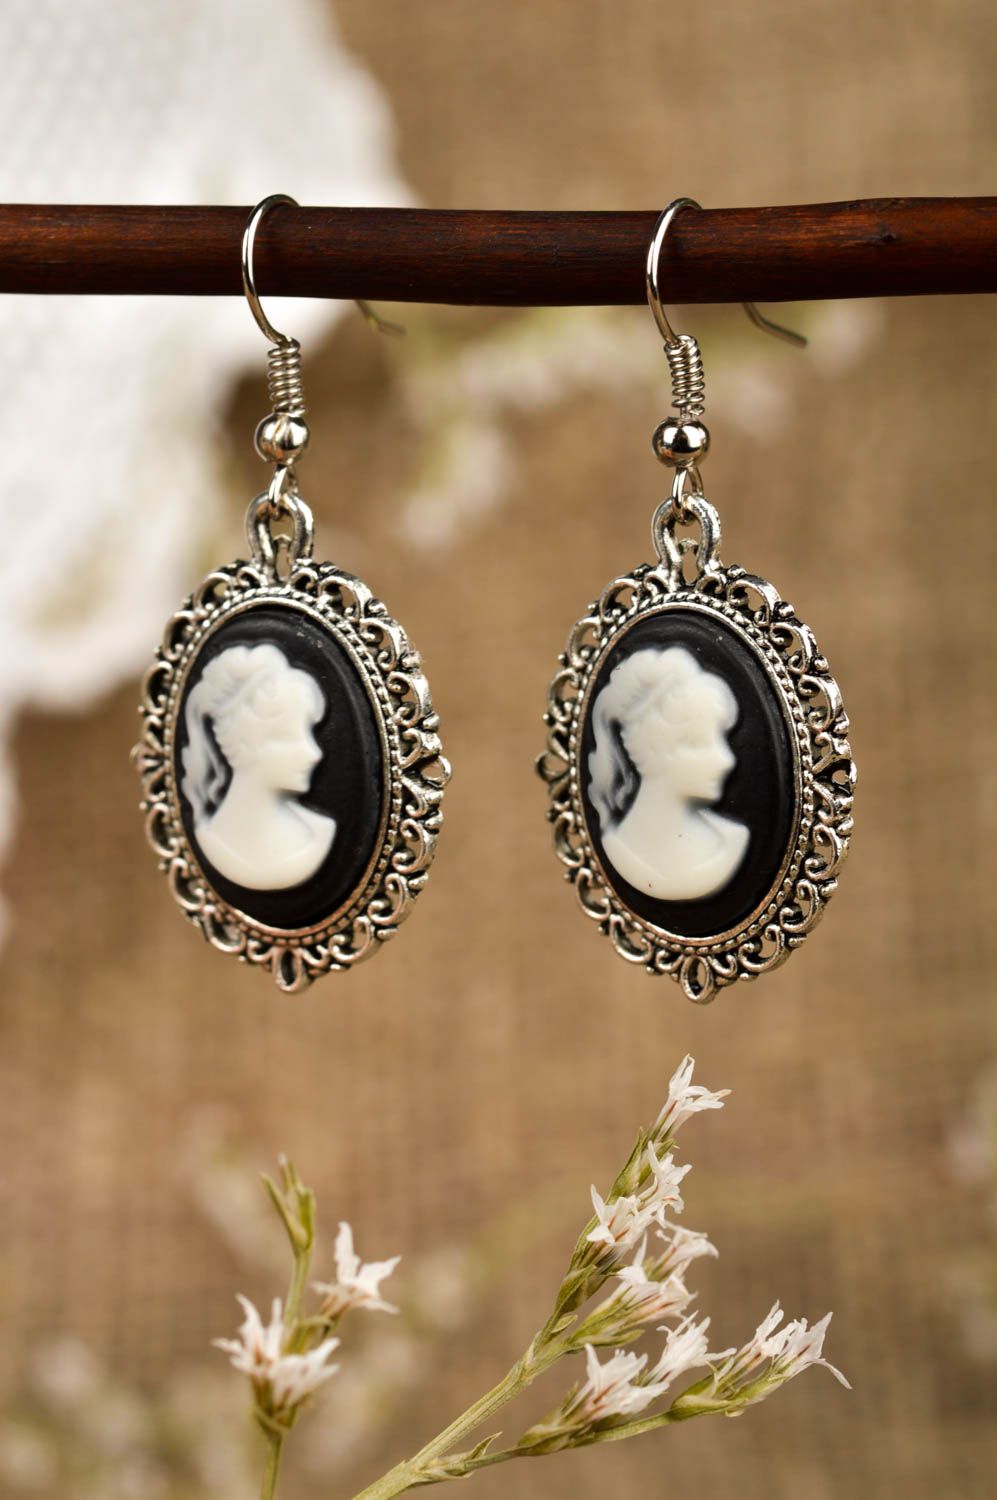 Handmade earrings with cameo, handmade bijouterie accessory for women great gift photo 1